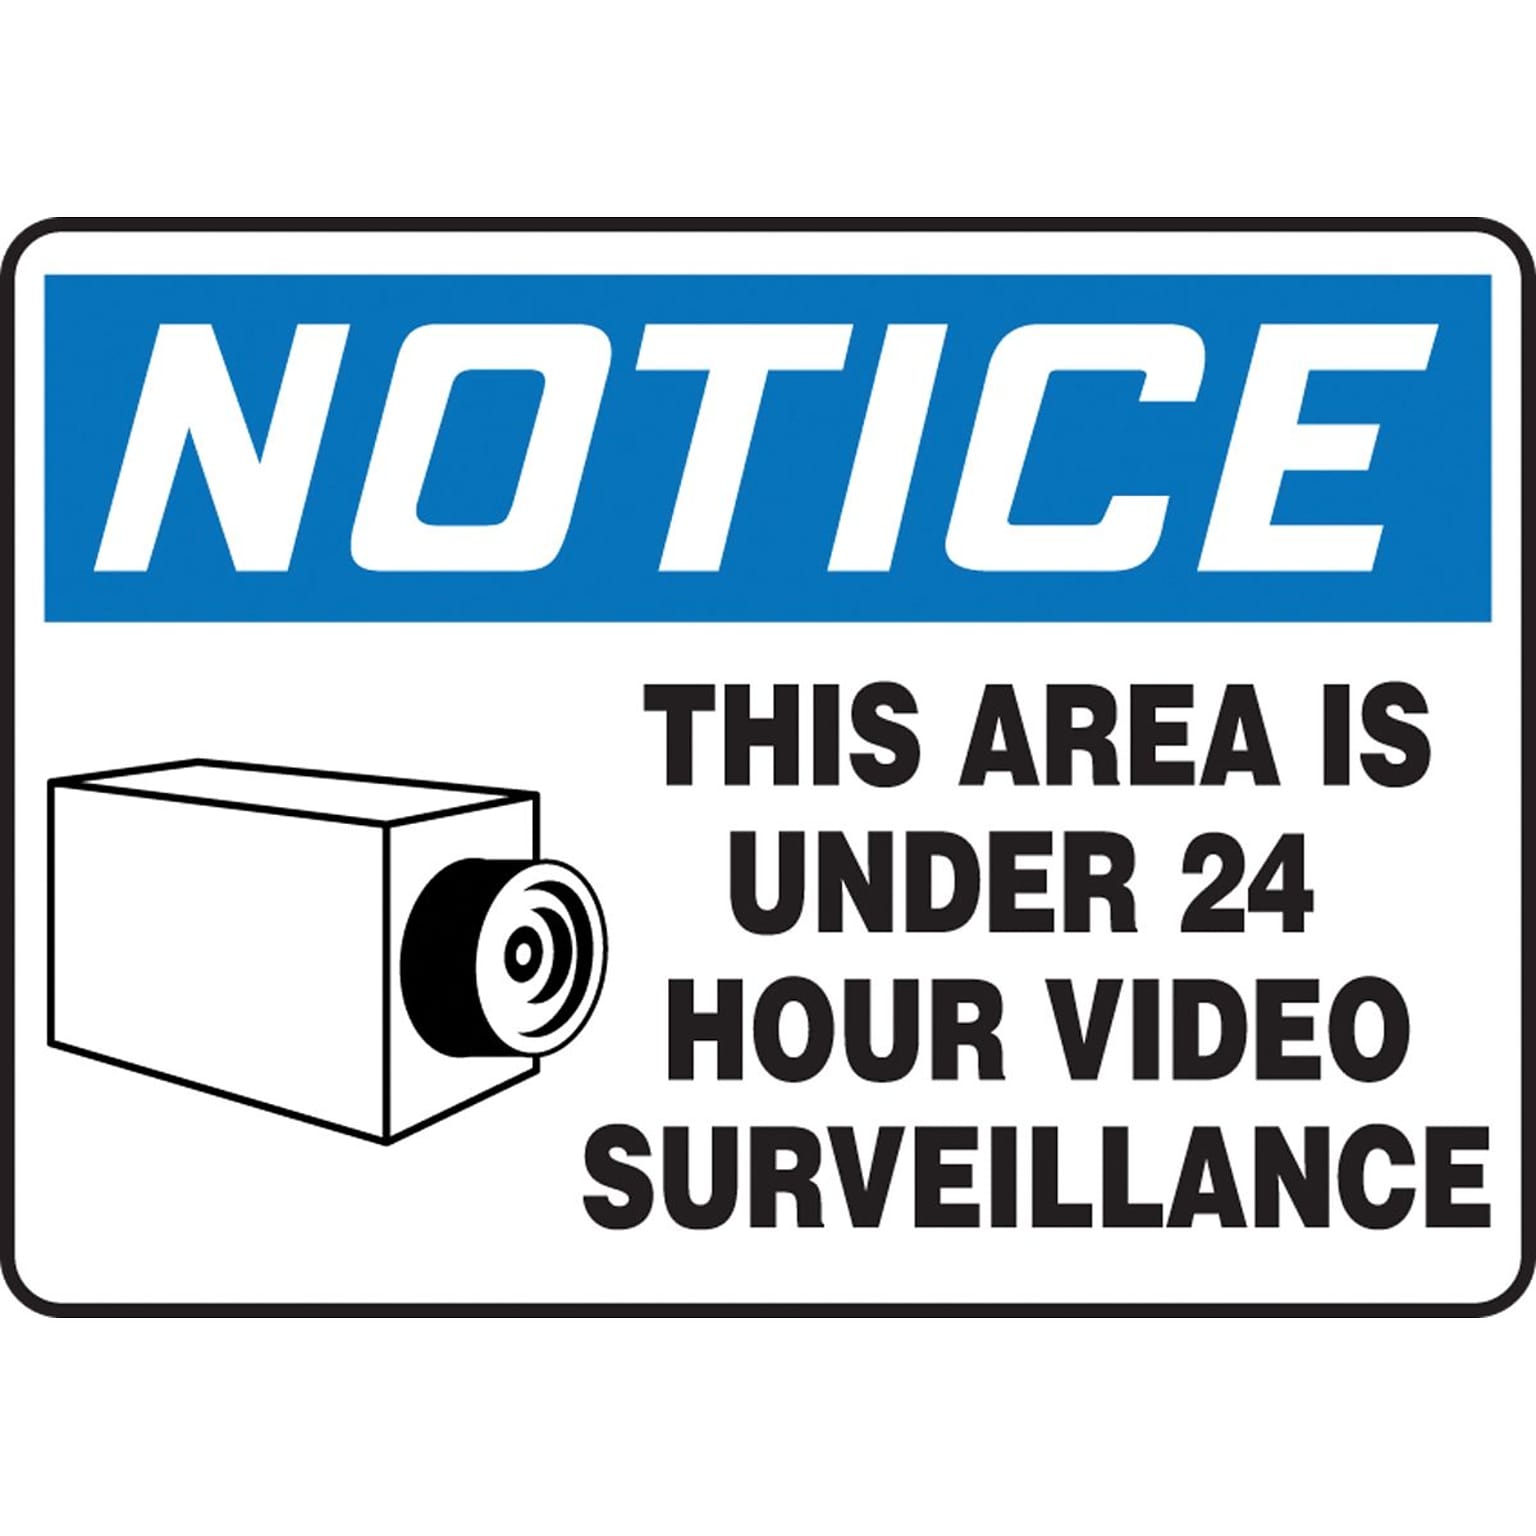 Accuform 7 x 10 Vinyl Safety Sign NOTICE THIS AREA IS..W/GRAPHIC, Blue/Black On White (MASE806VS)